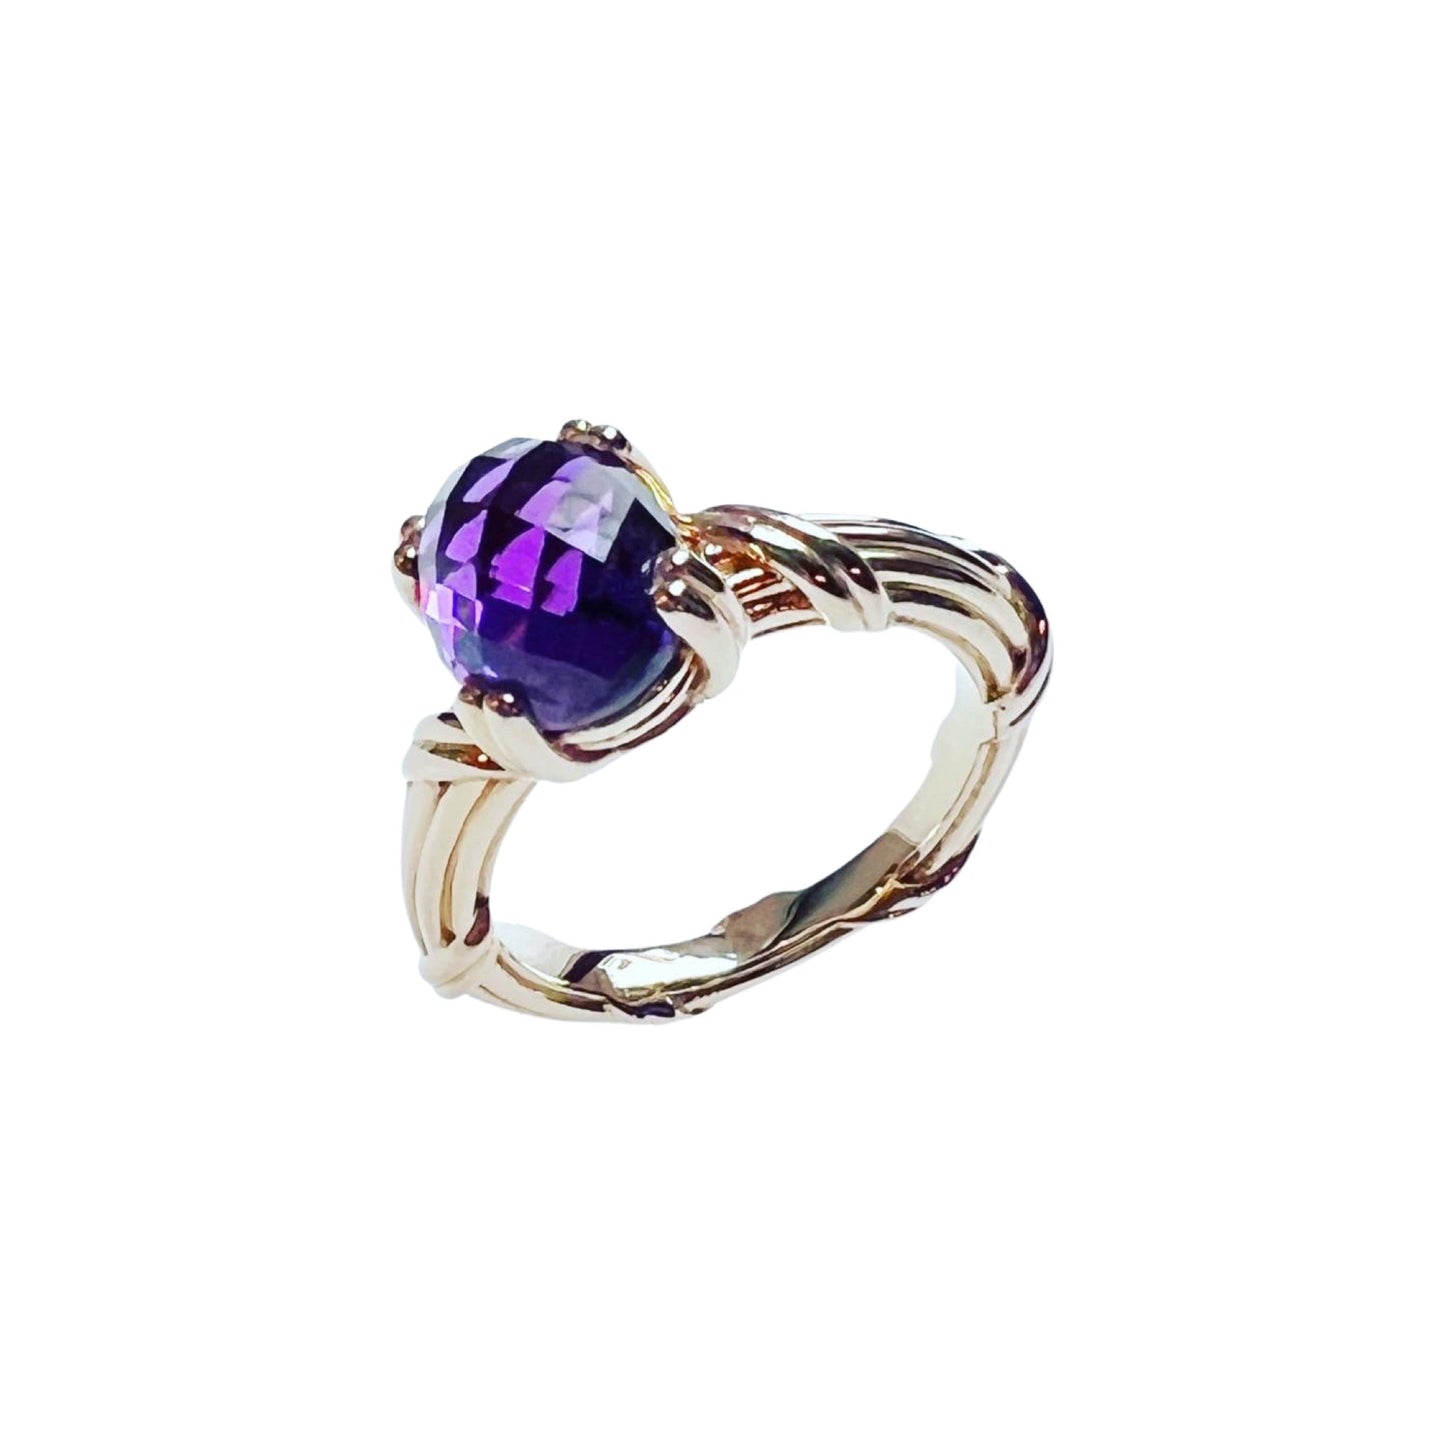 Fantasies Oval Amethyst Cocktail Ring in 18K yellow gold